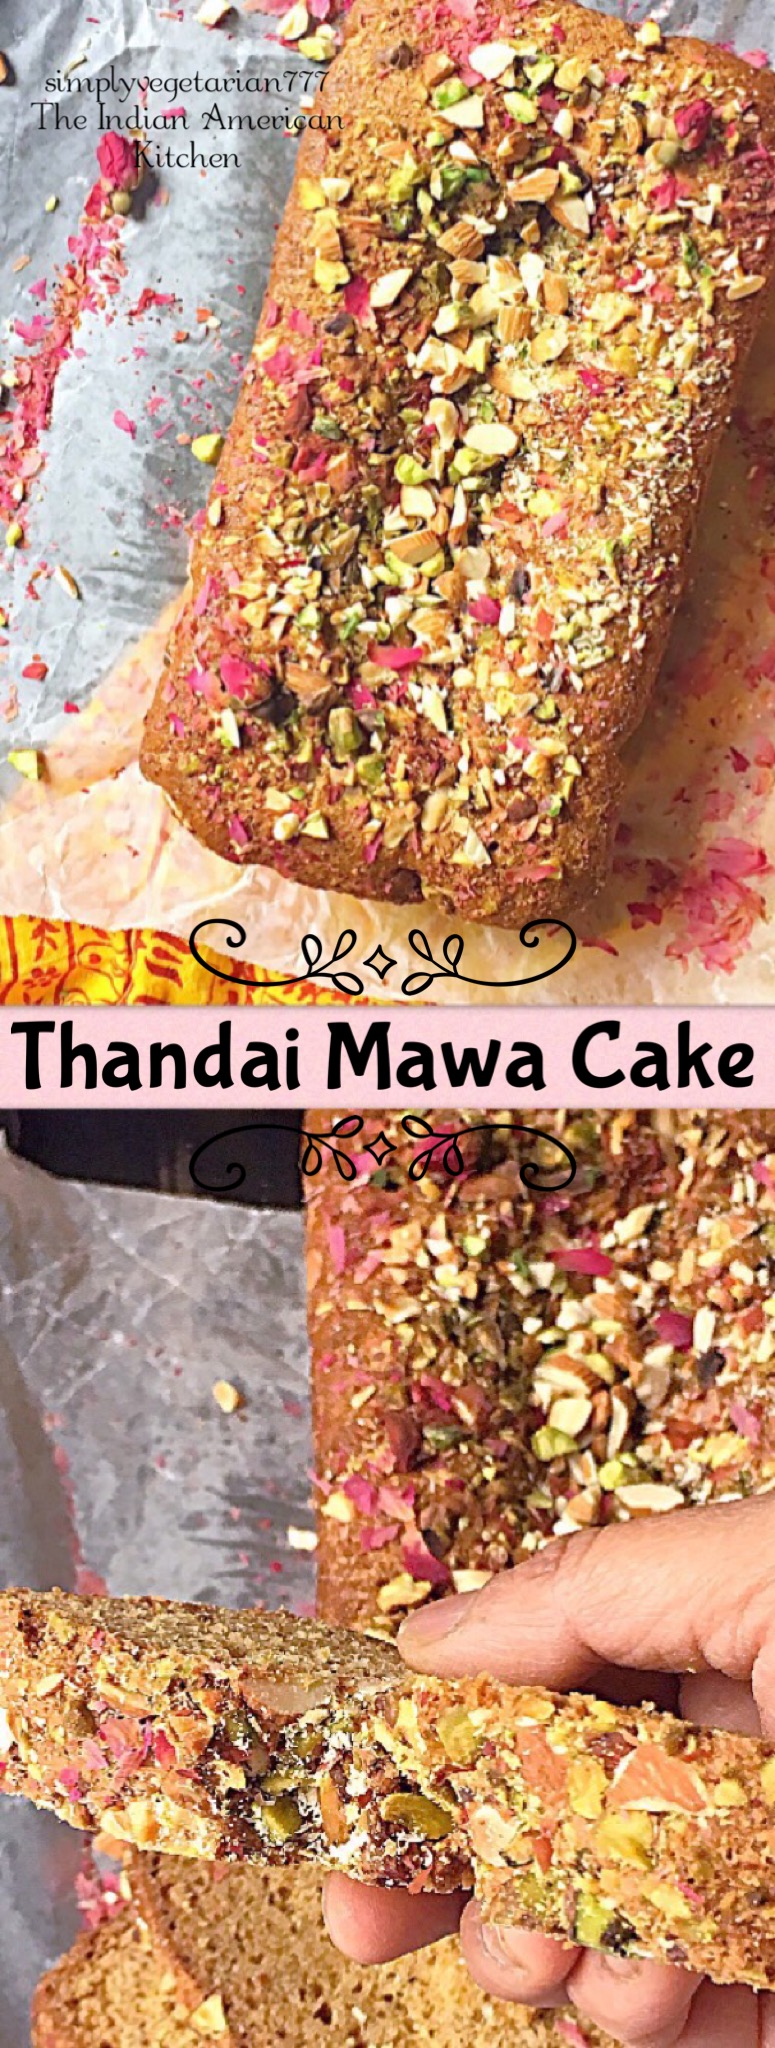 Thandai Mawa Cake is a rich and decadent cake made with Thandai flavors and Mawa (milk solids). It tastes like Indian Mithai and has super moist texture. This cake is perfect to celebrate any Indian Festival. #egglesscake #eggfreecake #thandairecipe #mawacake #fusioncakes #indiancake #mithaicake